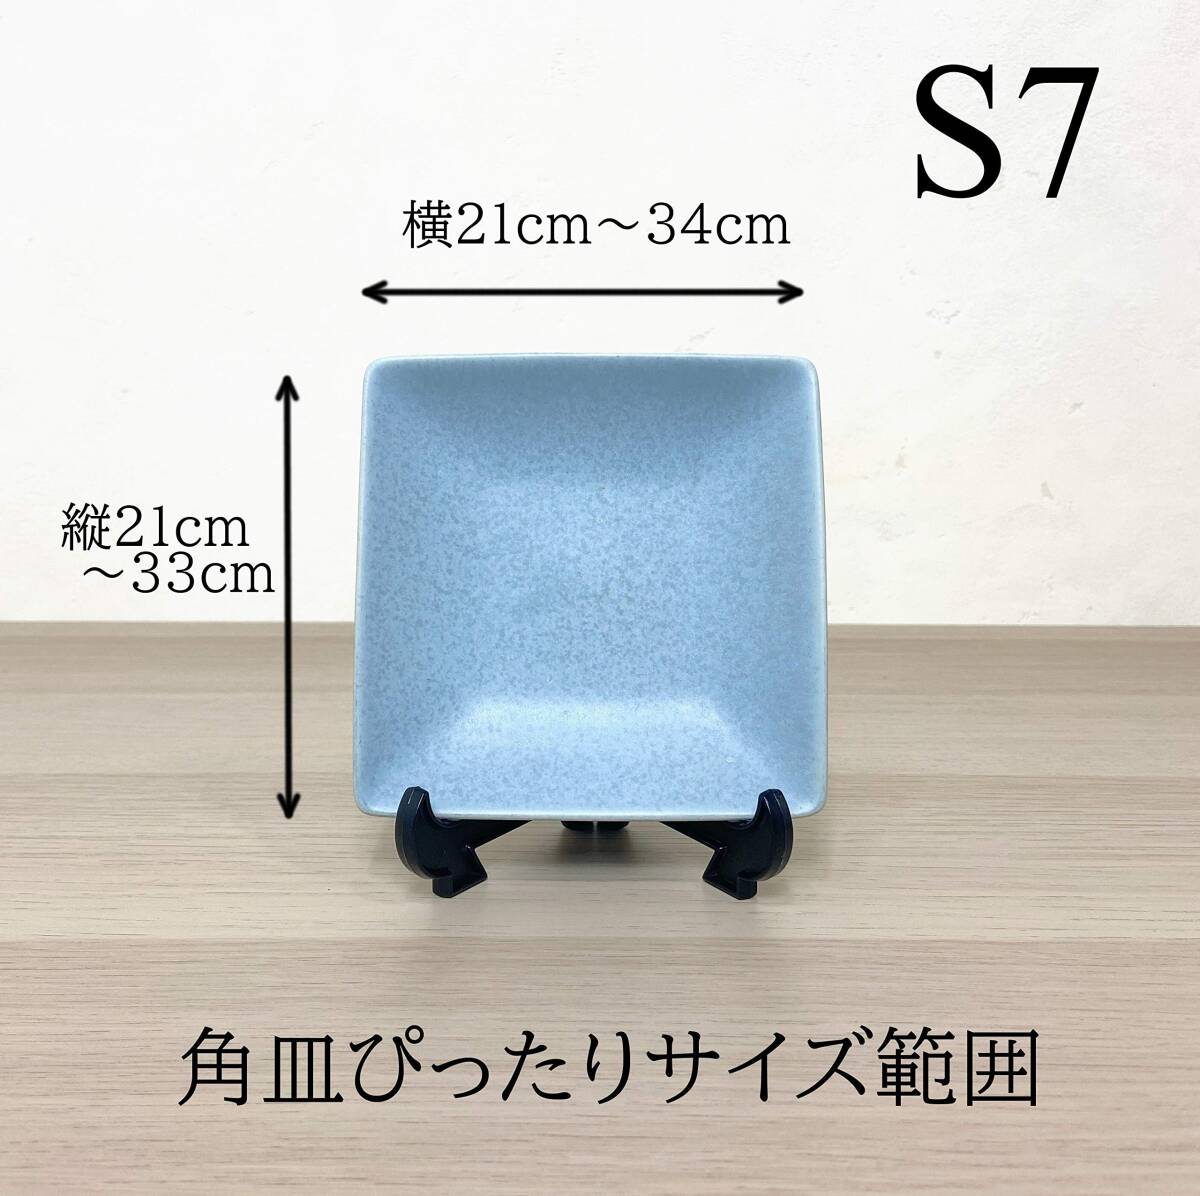 [ new arrivals commodity ] transparent made in Japan (S7 panel stand .. amount stand welcome board 1 piece ) easel amount establish *B4 width put possible (25